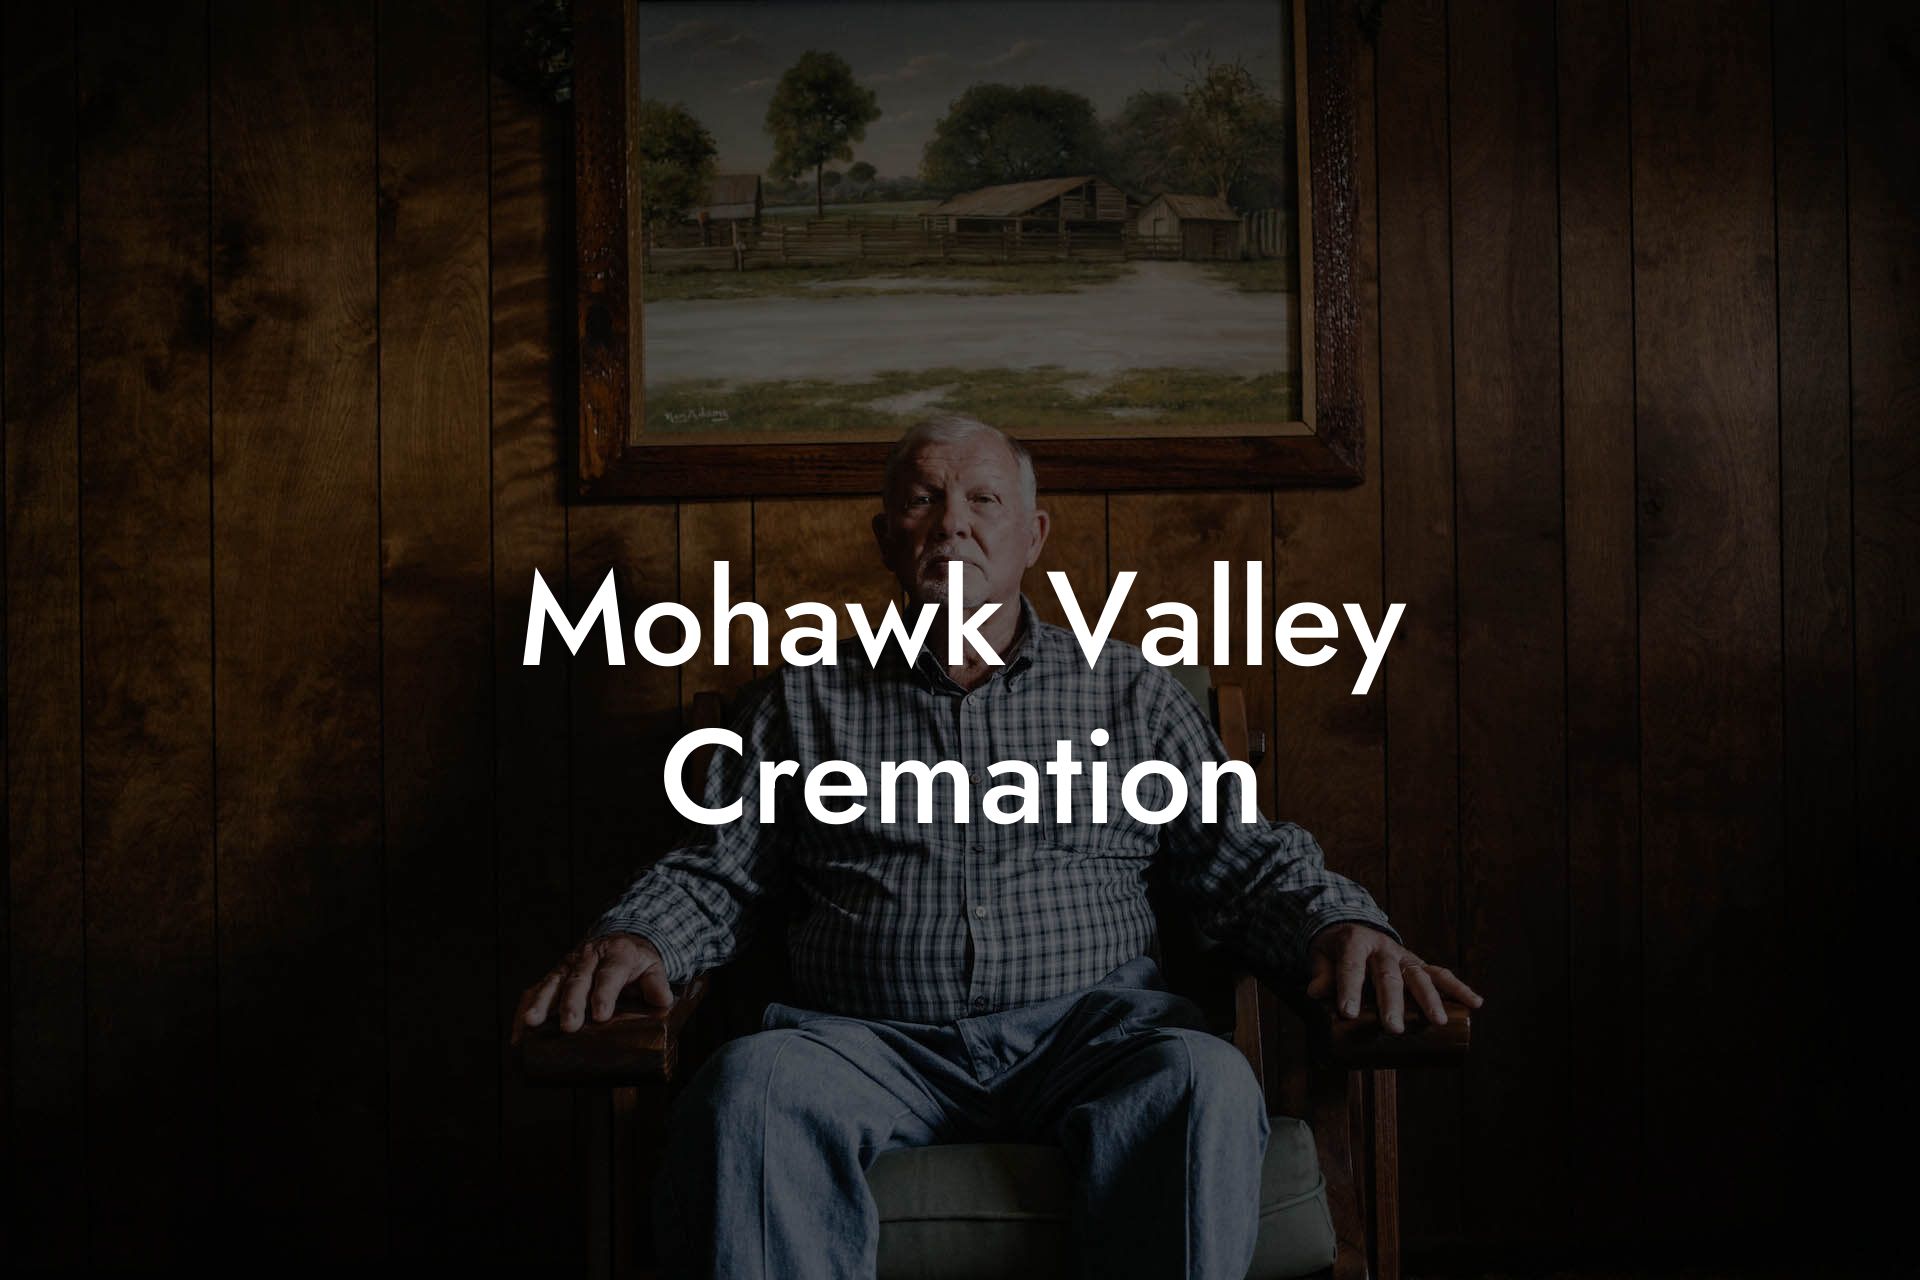 Mohawk Valley Cremation